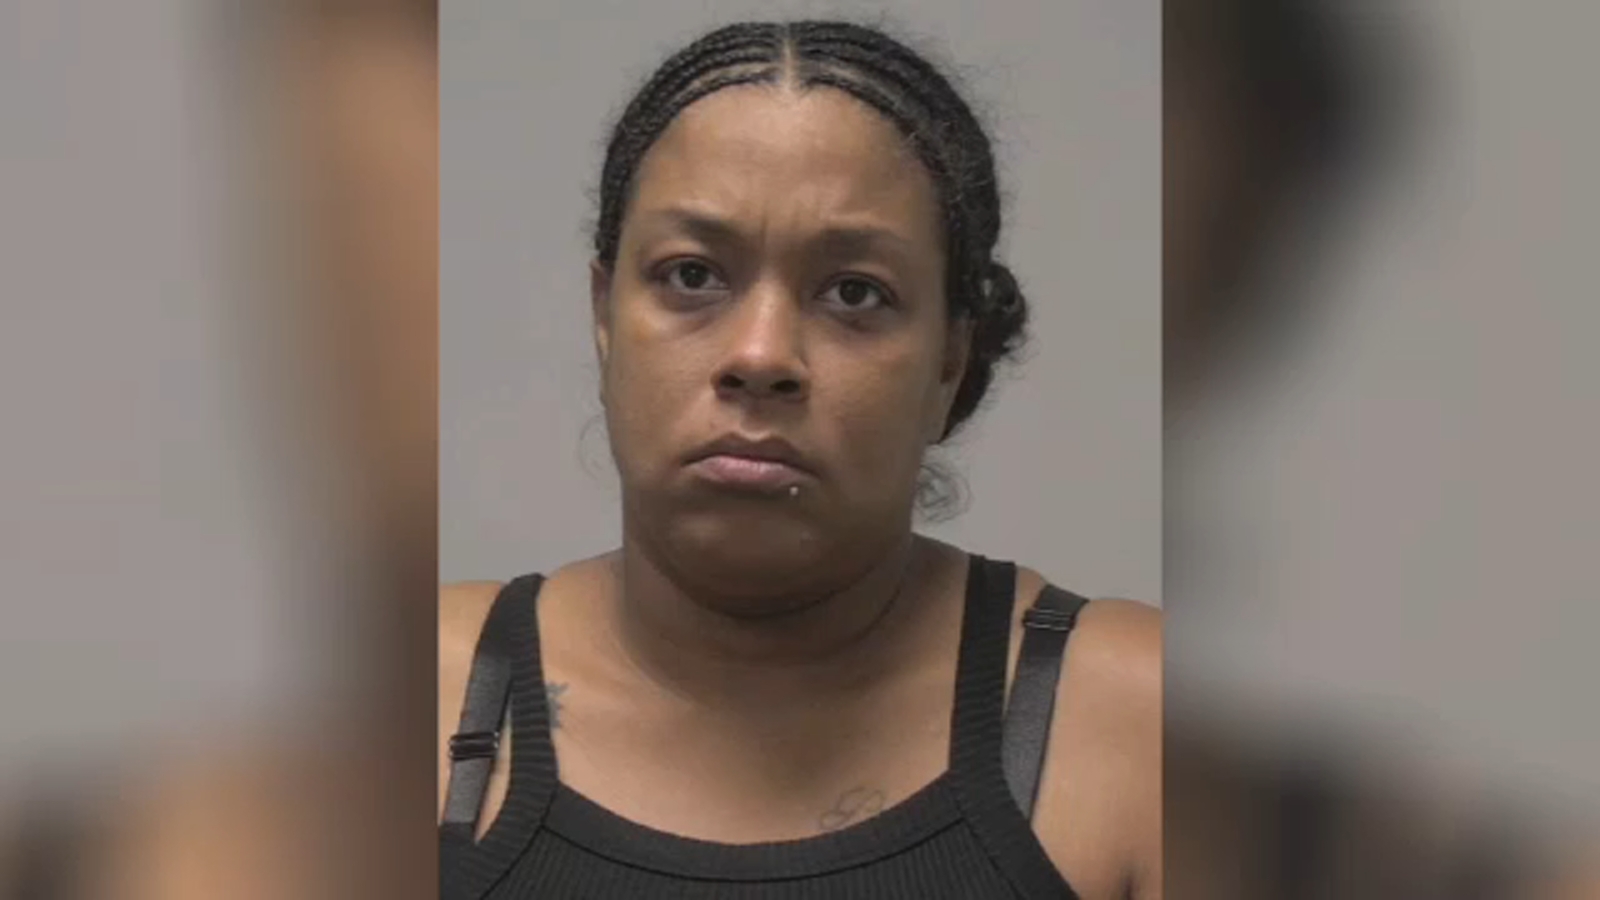  Woman arrested in Trenton after disturbing video involving infant surfaces: Police 